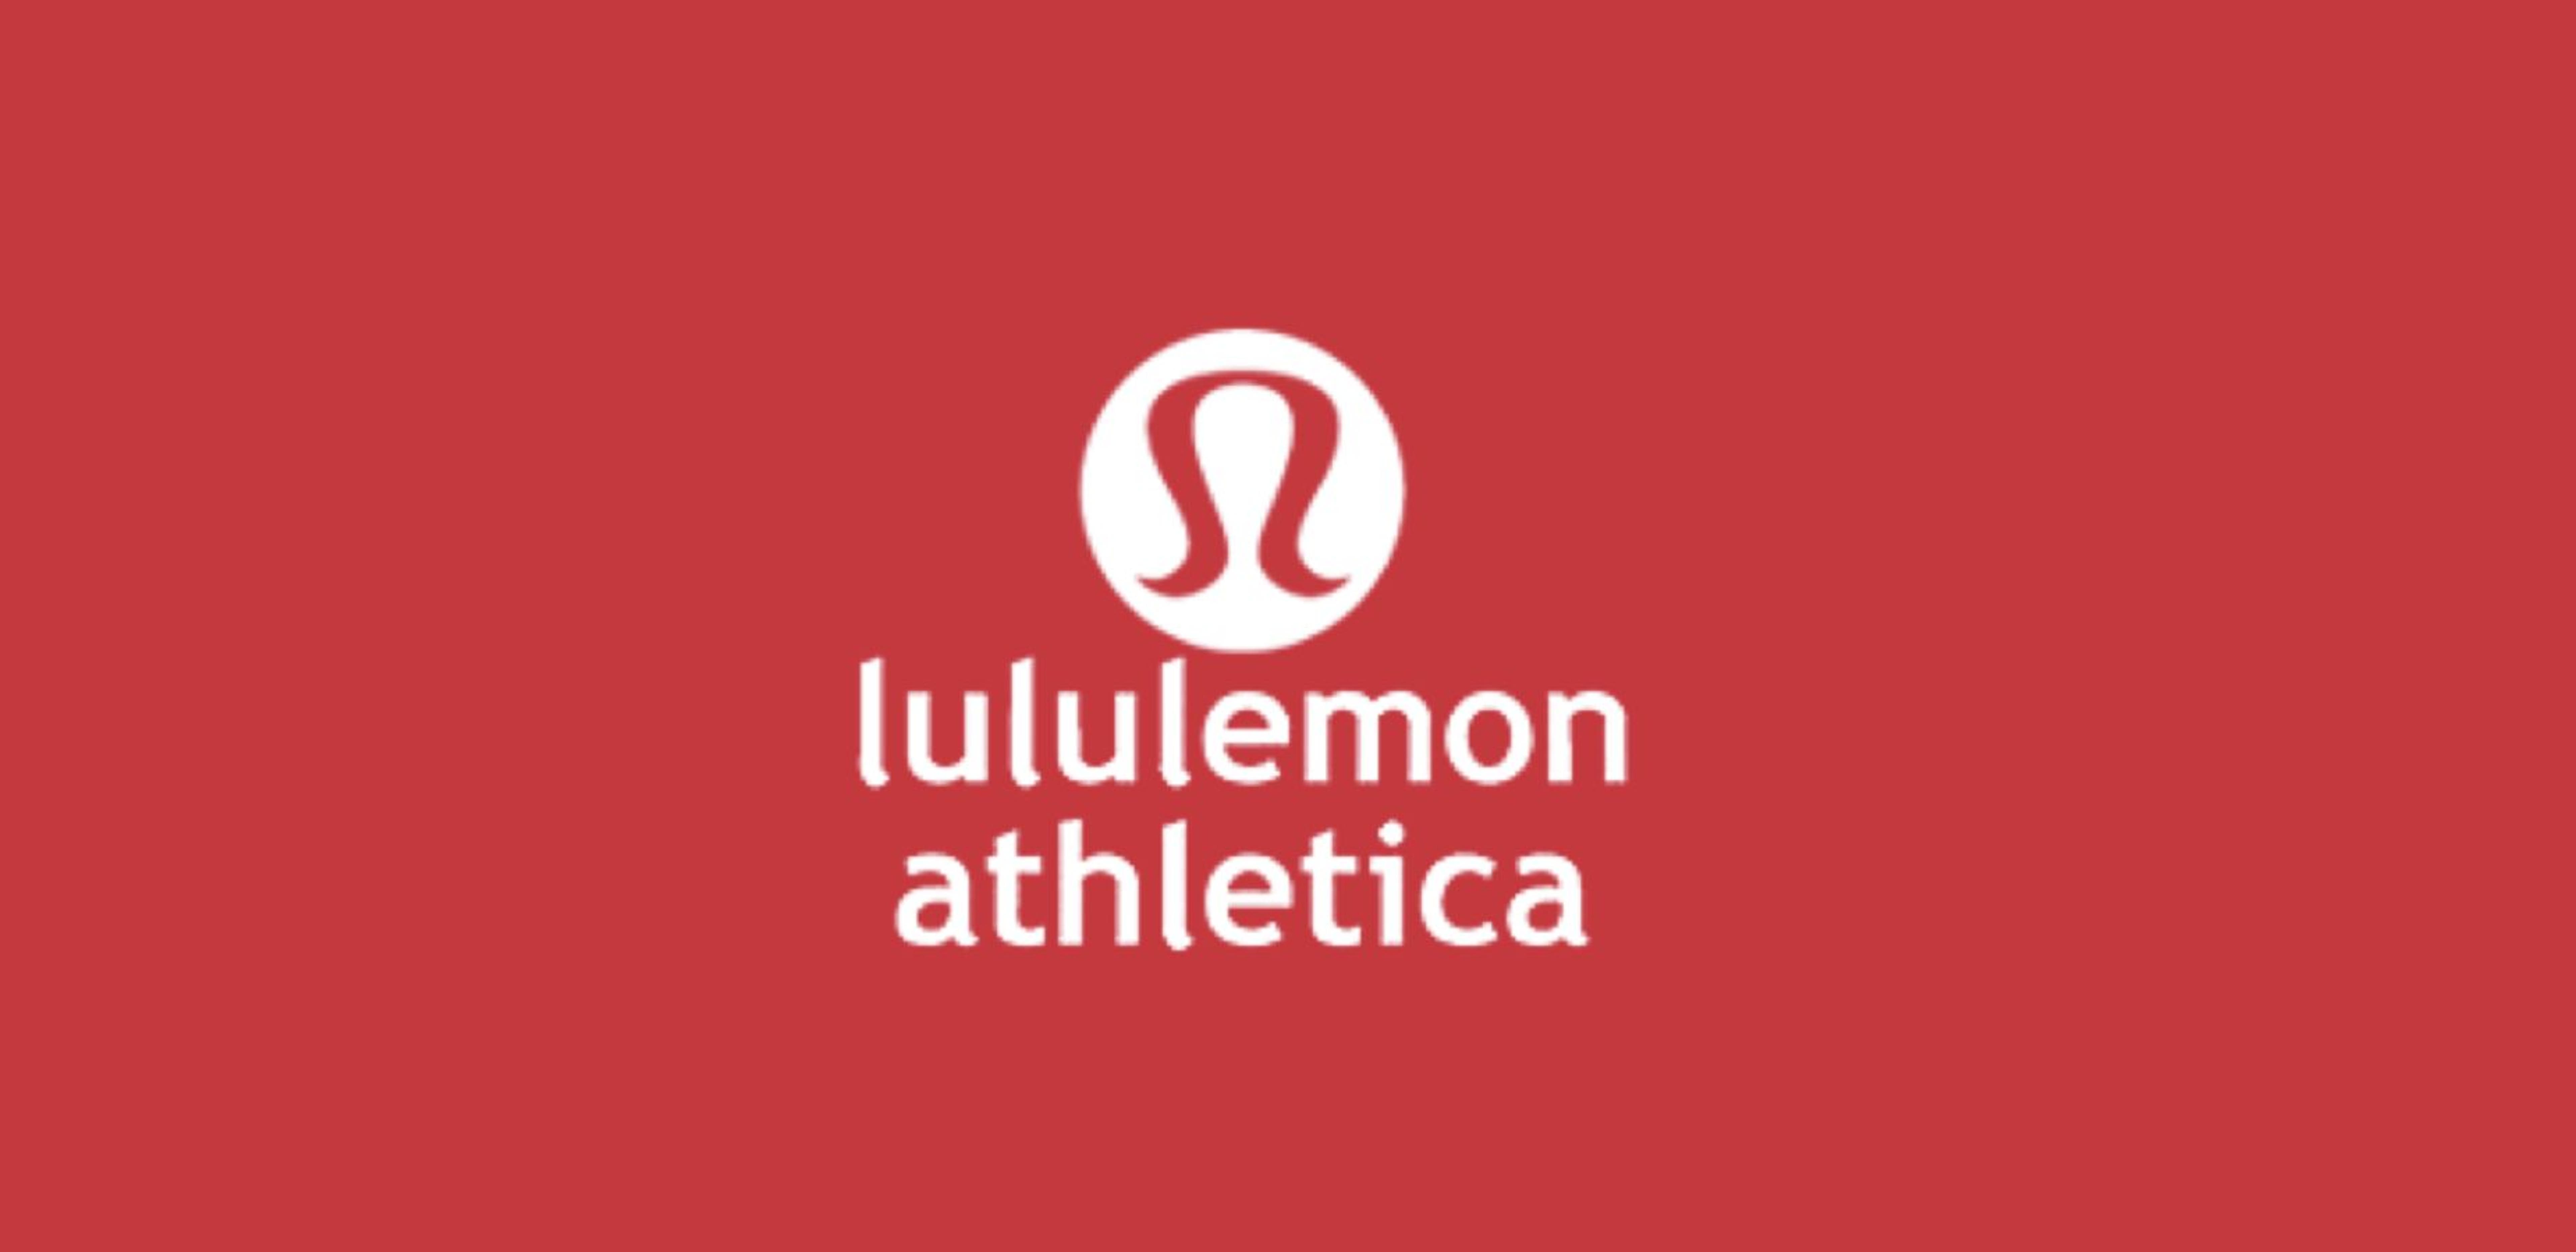 Lululemon Gets Price Target Bumps By Analysts Following Upbeat Q4 Results, Shares Jump